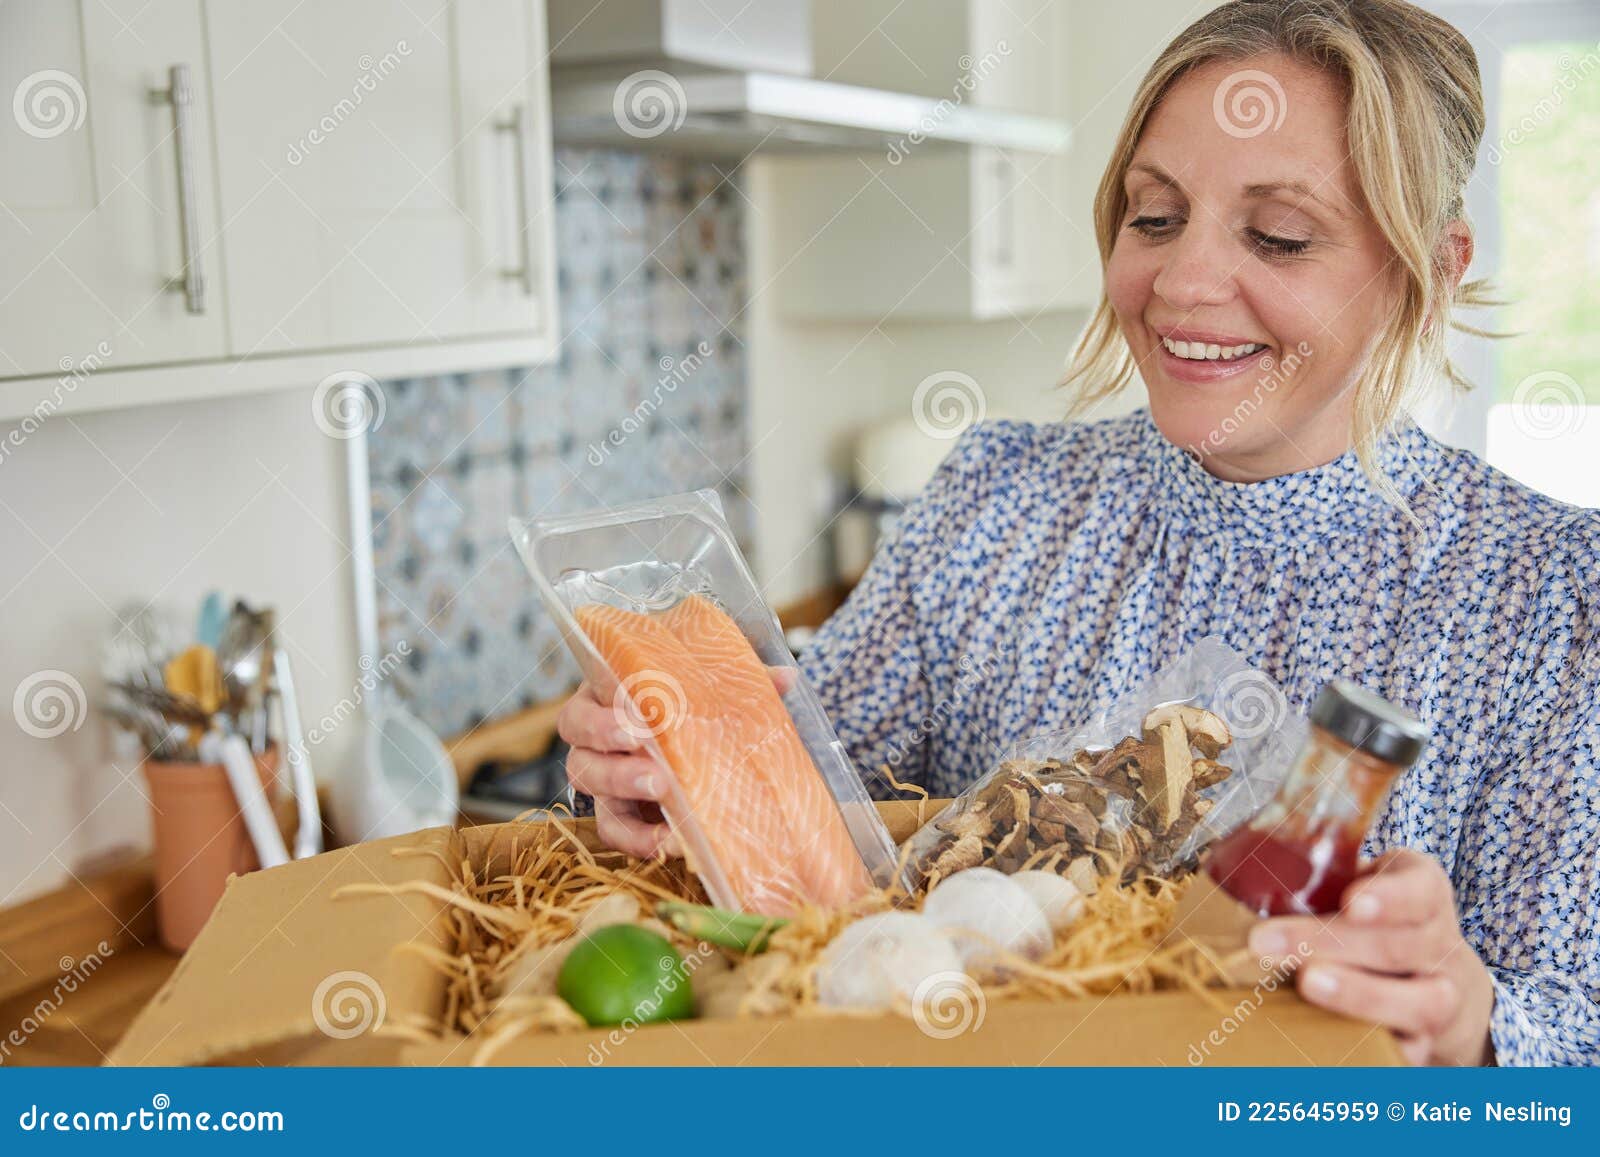 woman unpacking online meal food recipe kit delivered to home